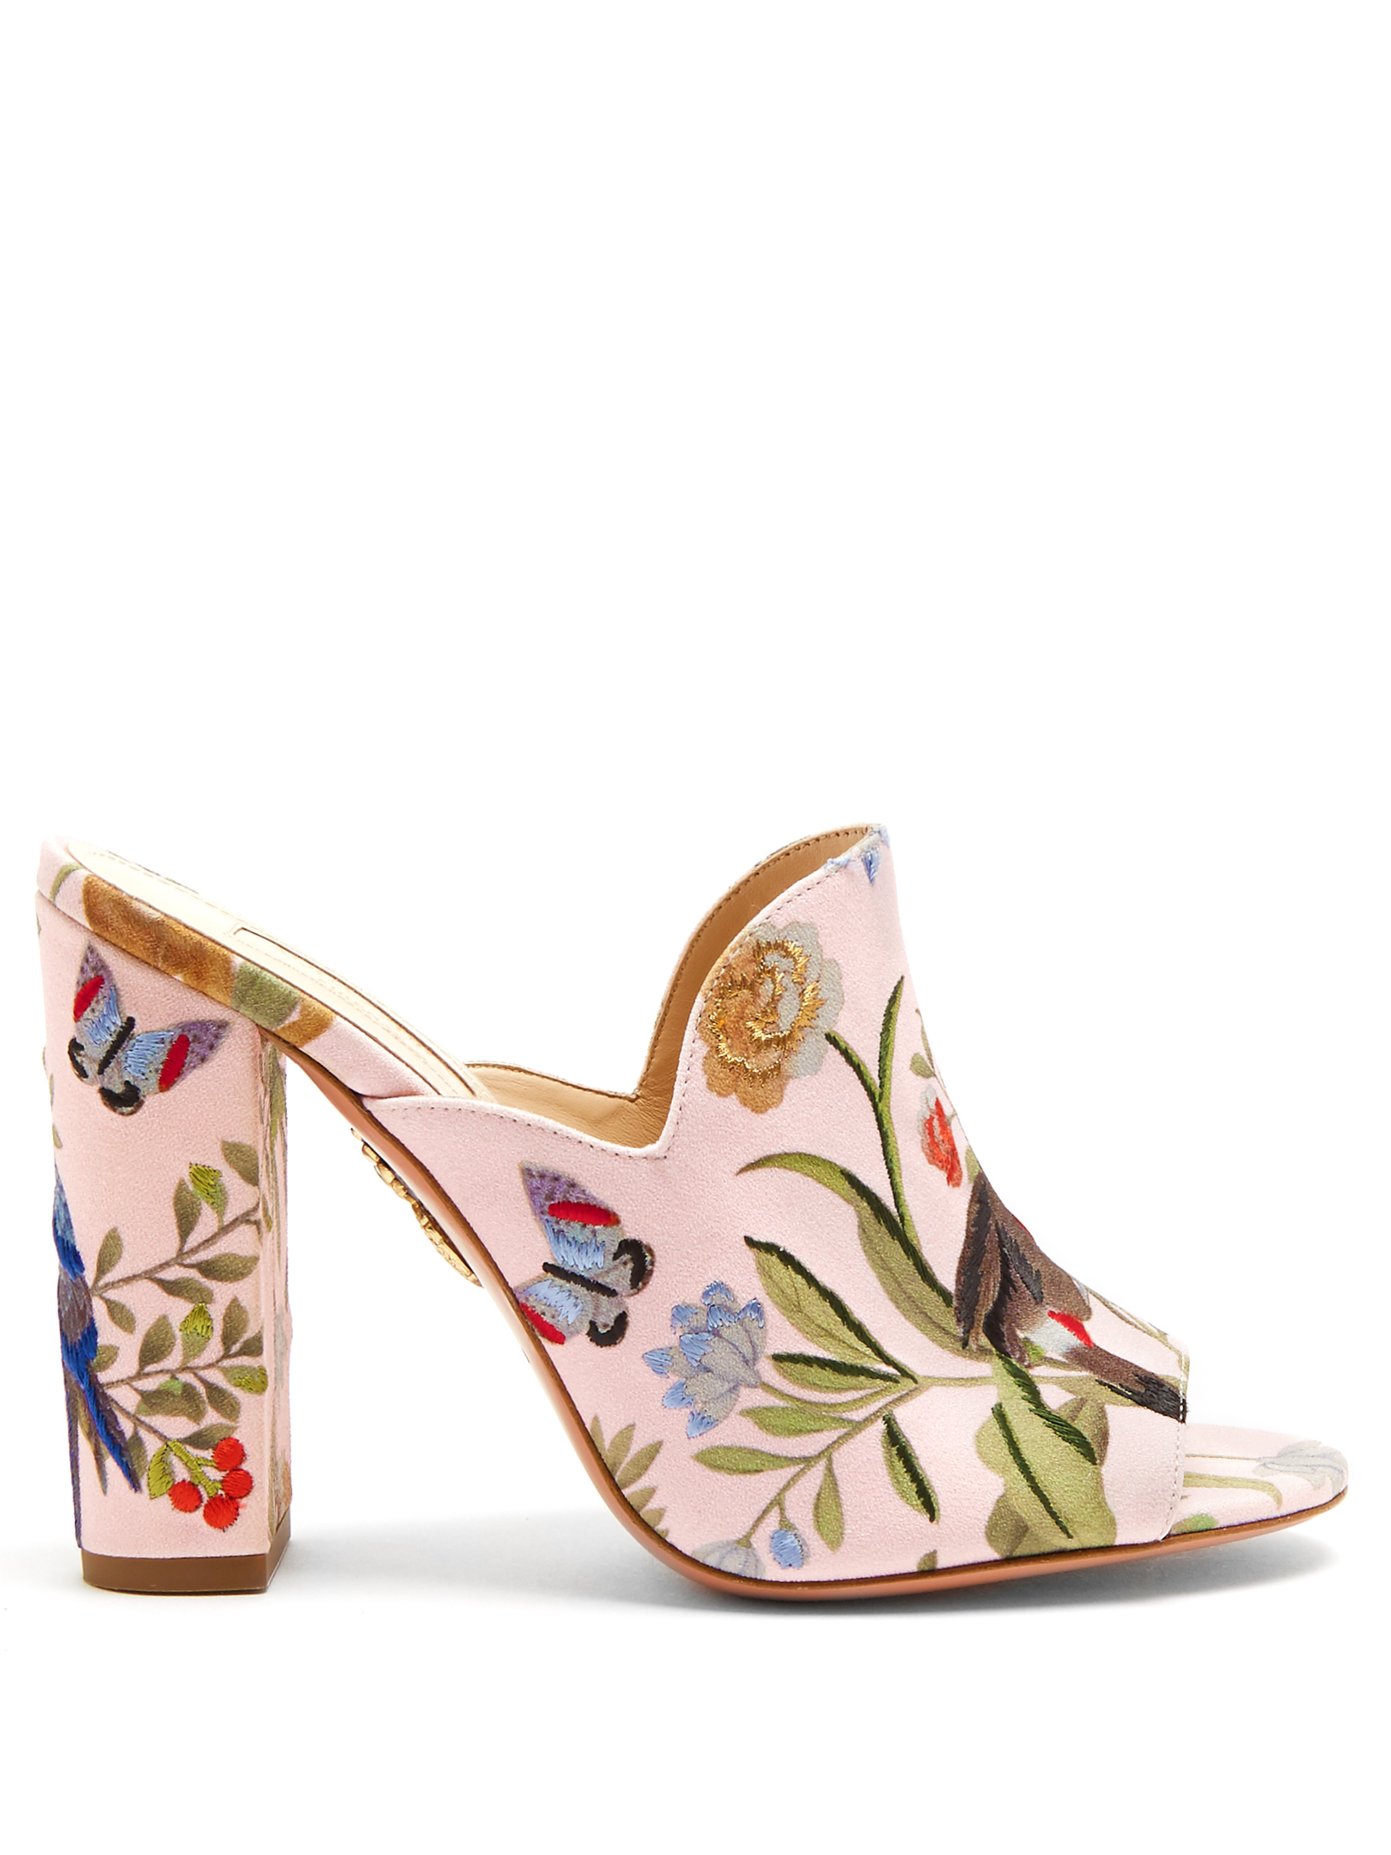 embroidered mules uk